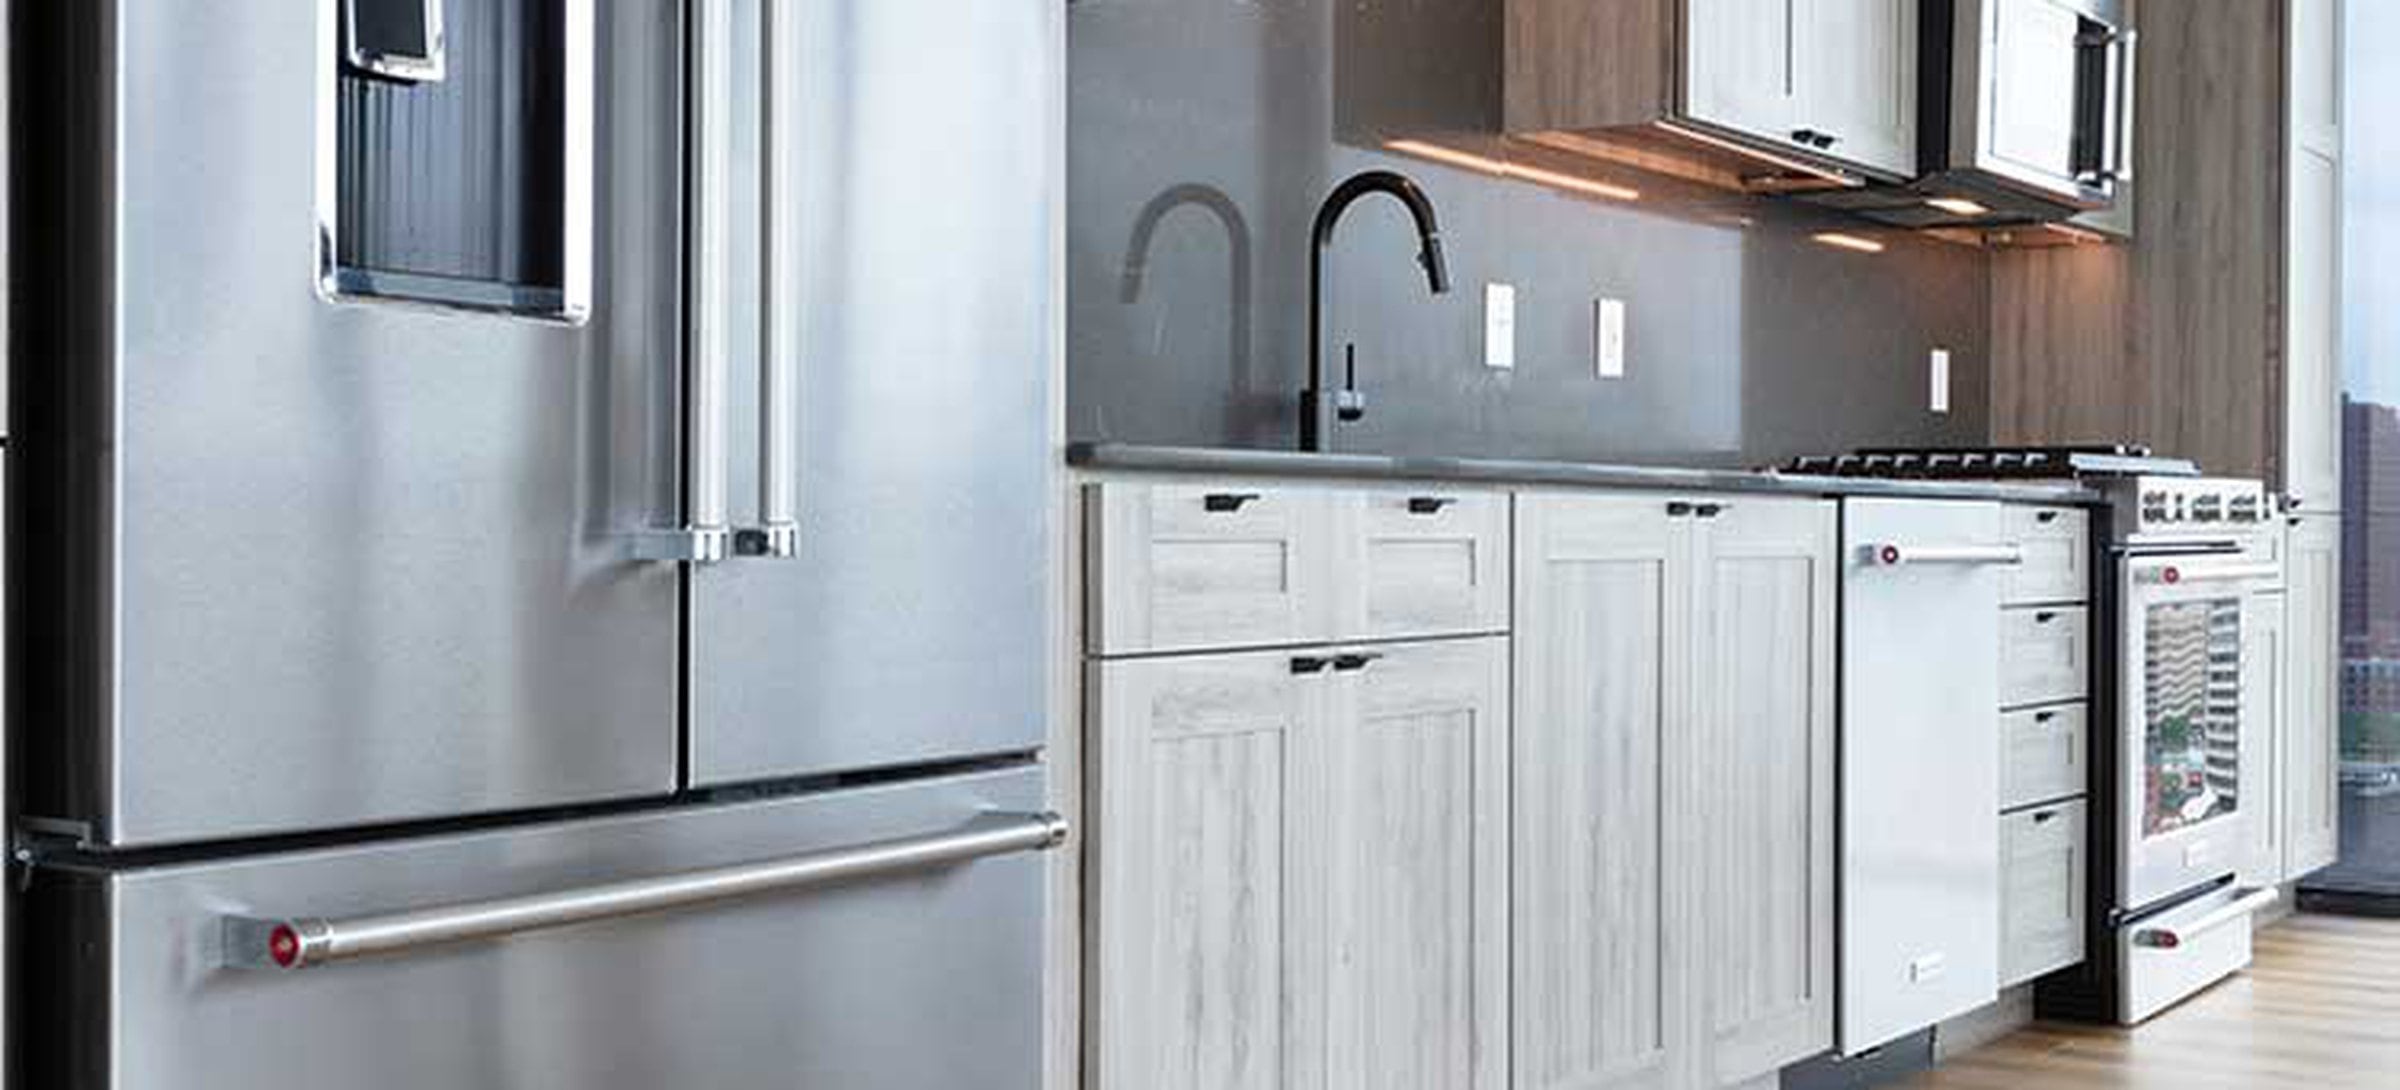 Penthouse-level Signature Collection apartment homes feature kitchens with upgraded appliances